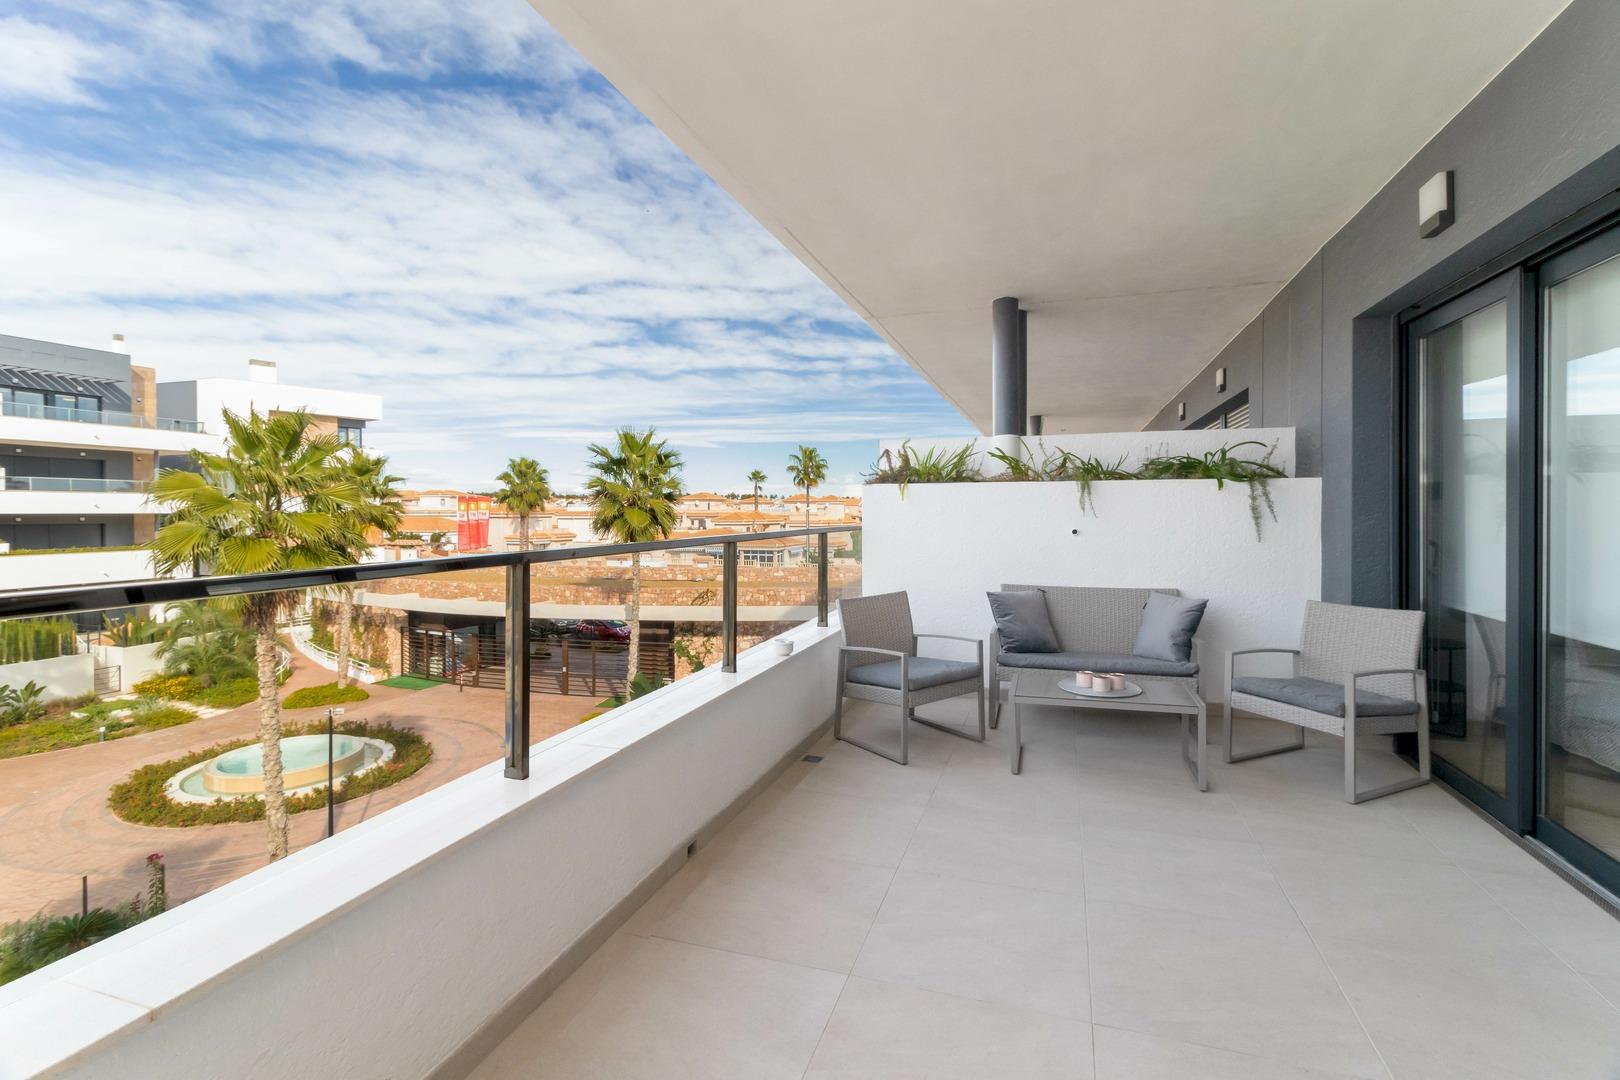 Luxury apartment for sale in Flamenca Village in the heart of Playa Flamenca.